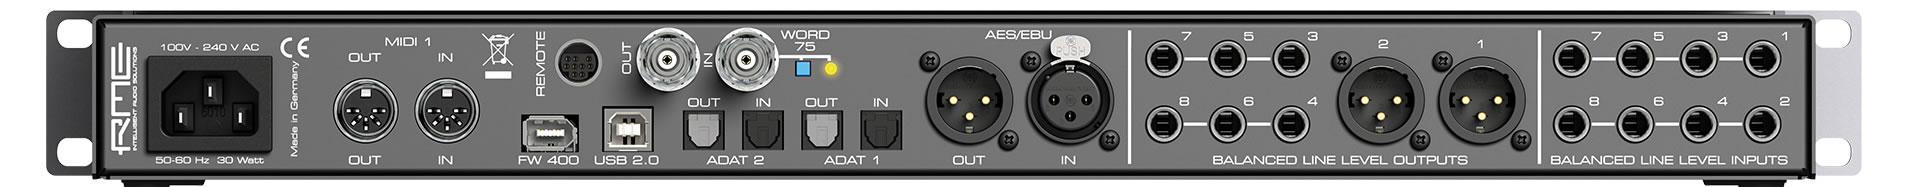 RME Fireface UFX - Rear Panel - Click To Enlarge